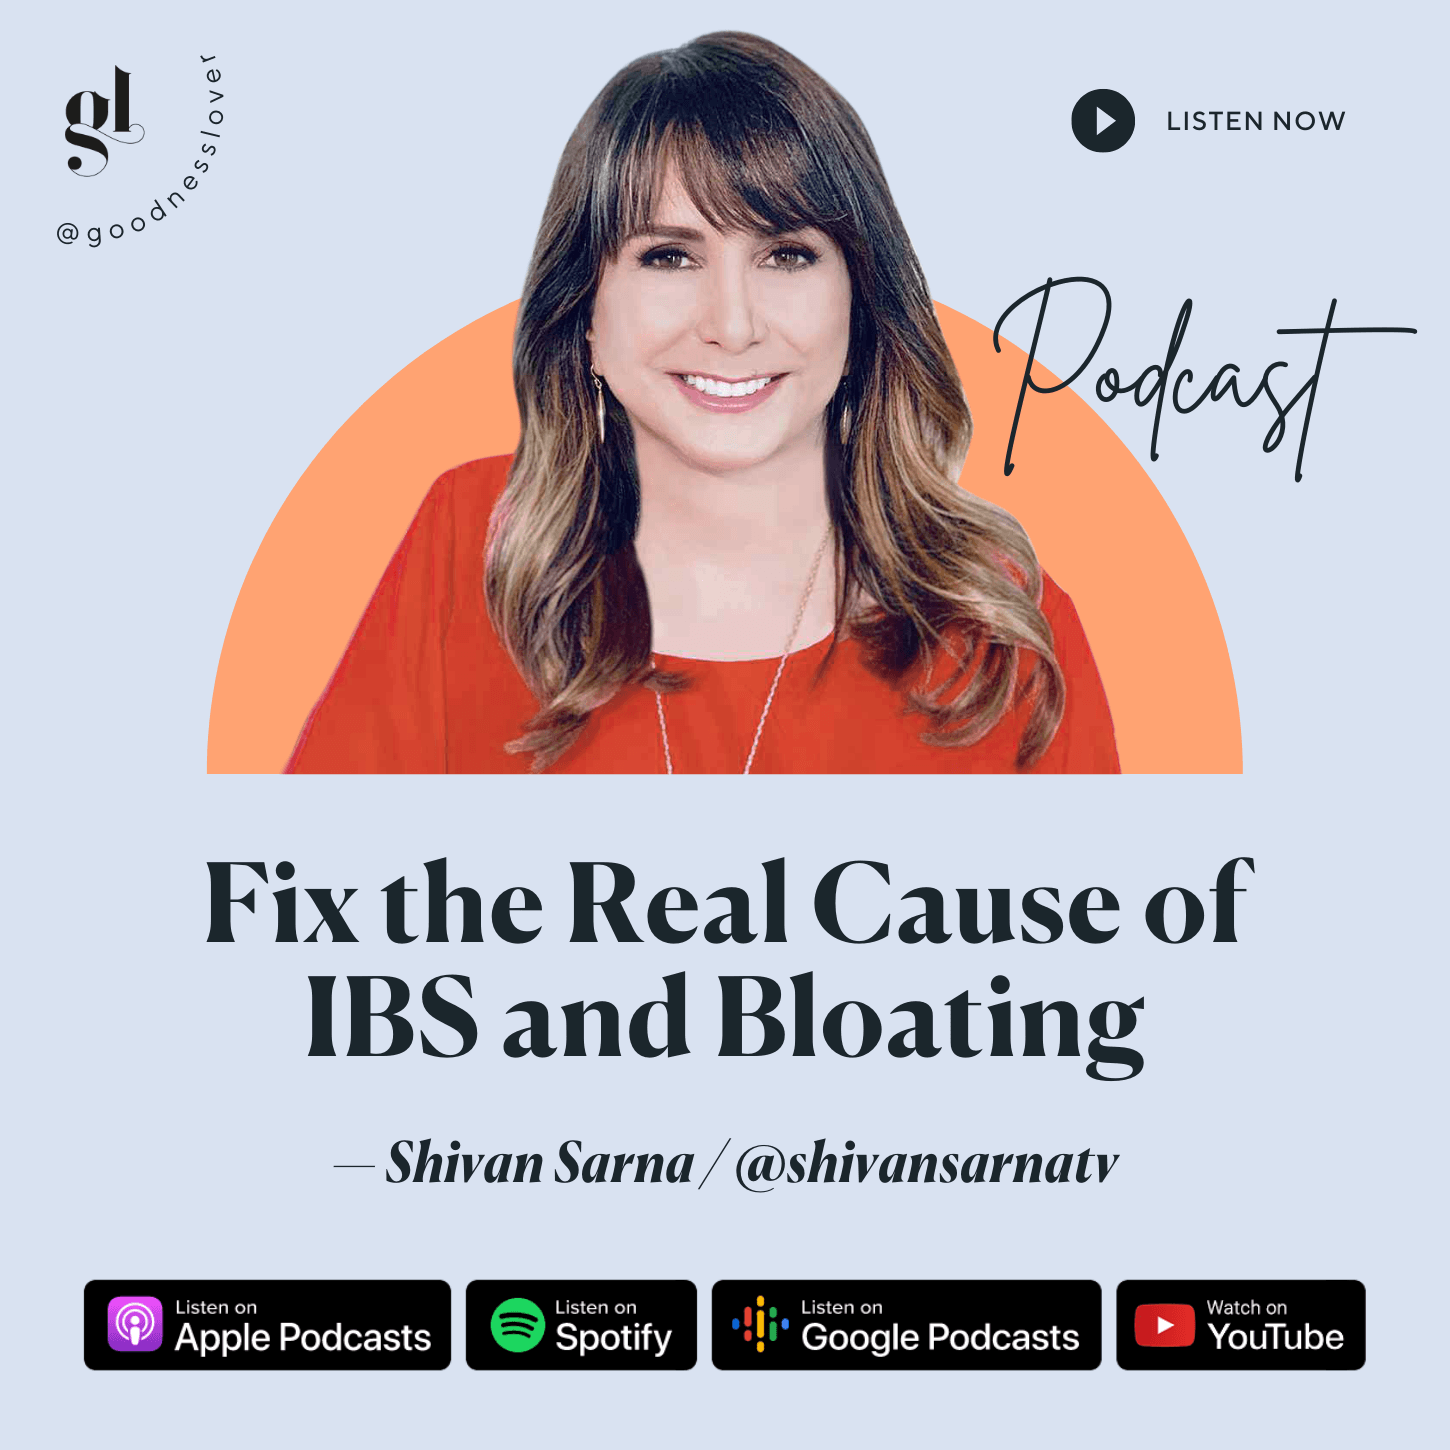 How To Fix the Real Cause of IBS and Bloating | Shivan Sarna